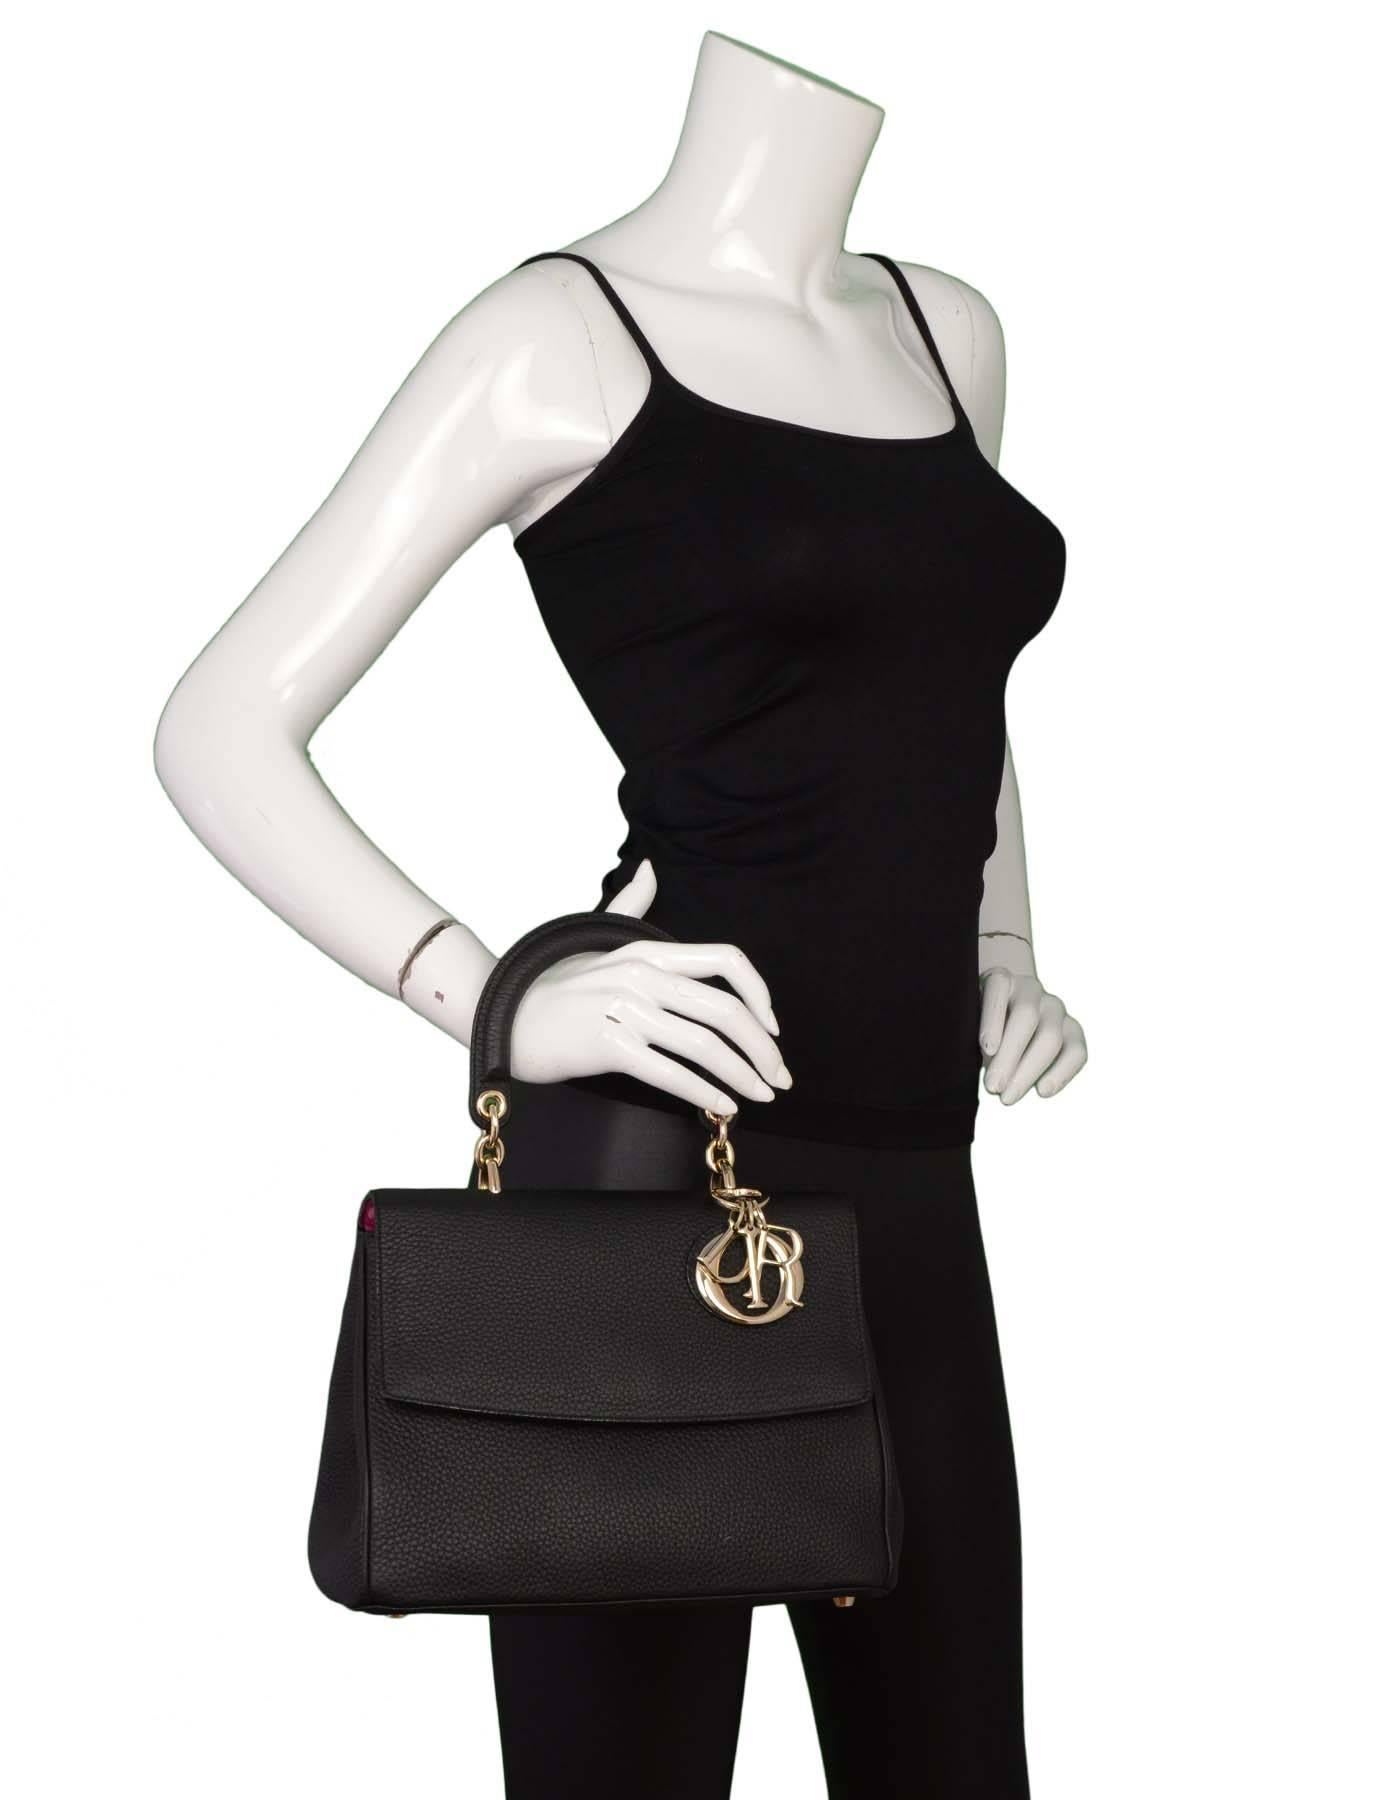 Christian Dior Black Leather Small Be Dior Bag GHW rt. $4, 400 4